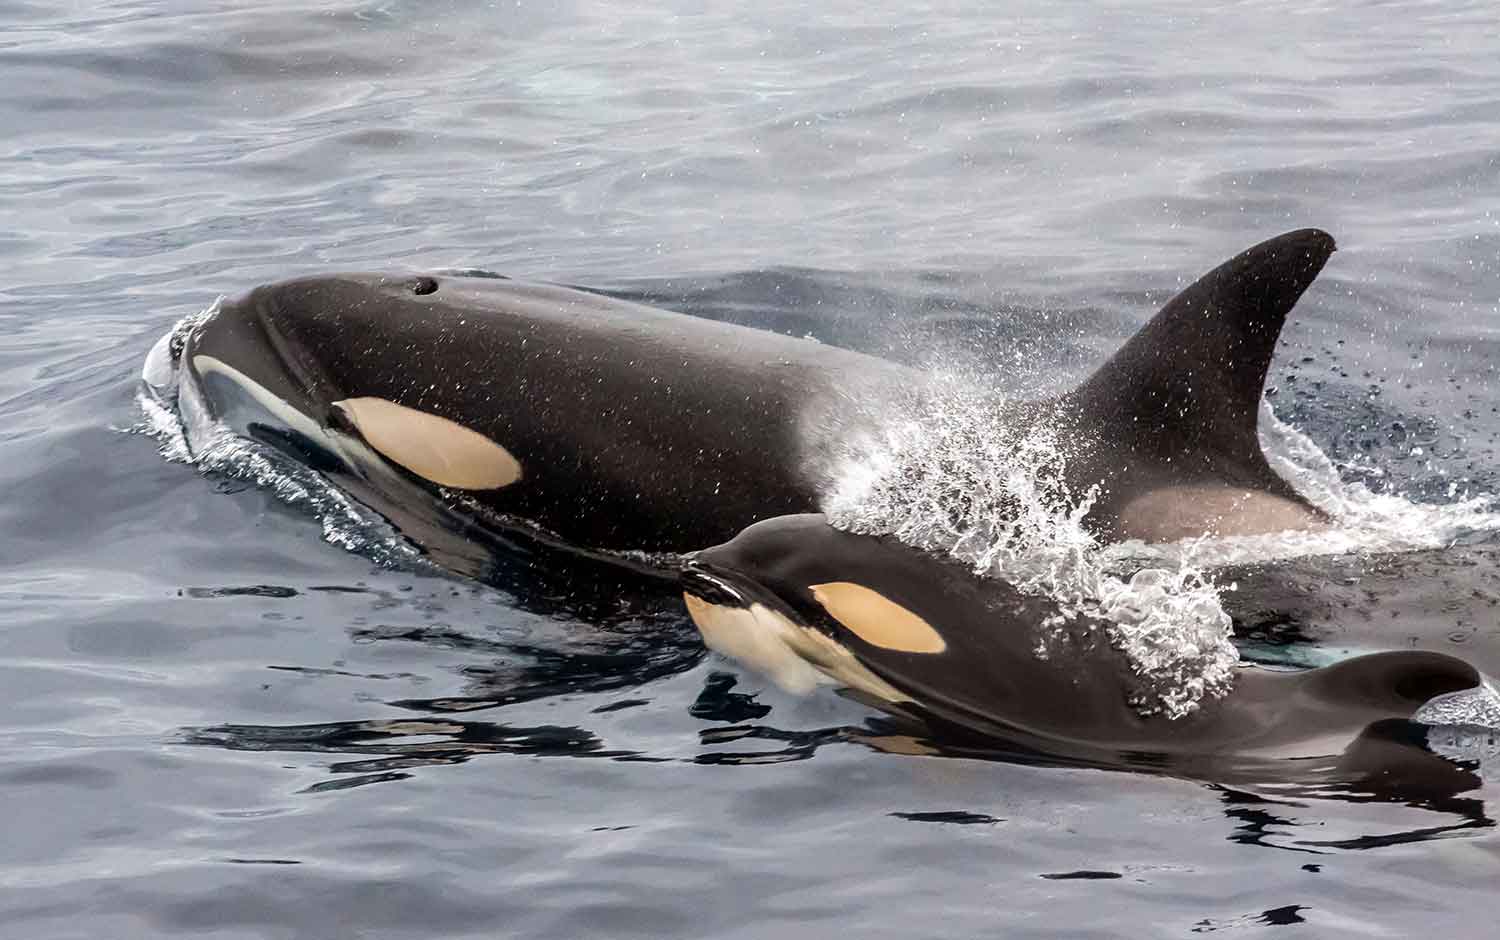 An adult orca and an orca calf swim side by side.